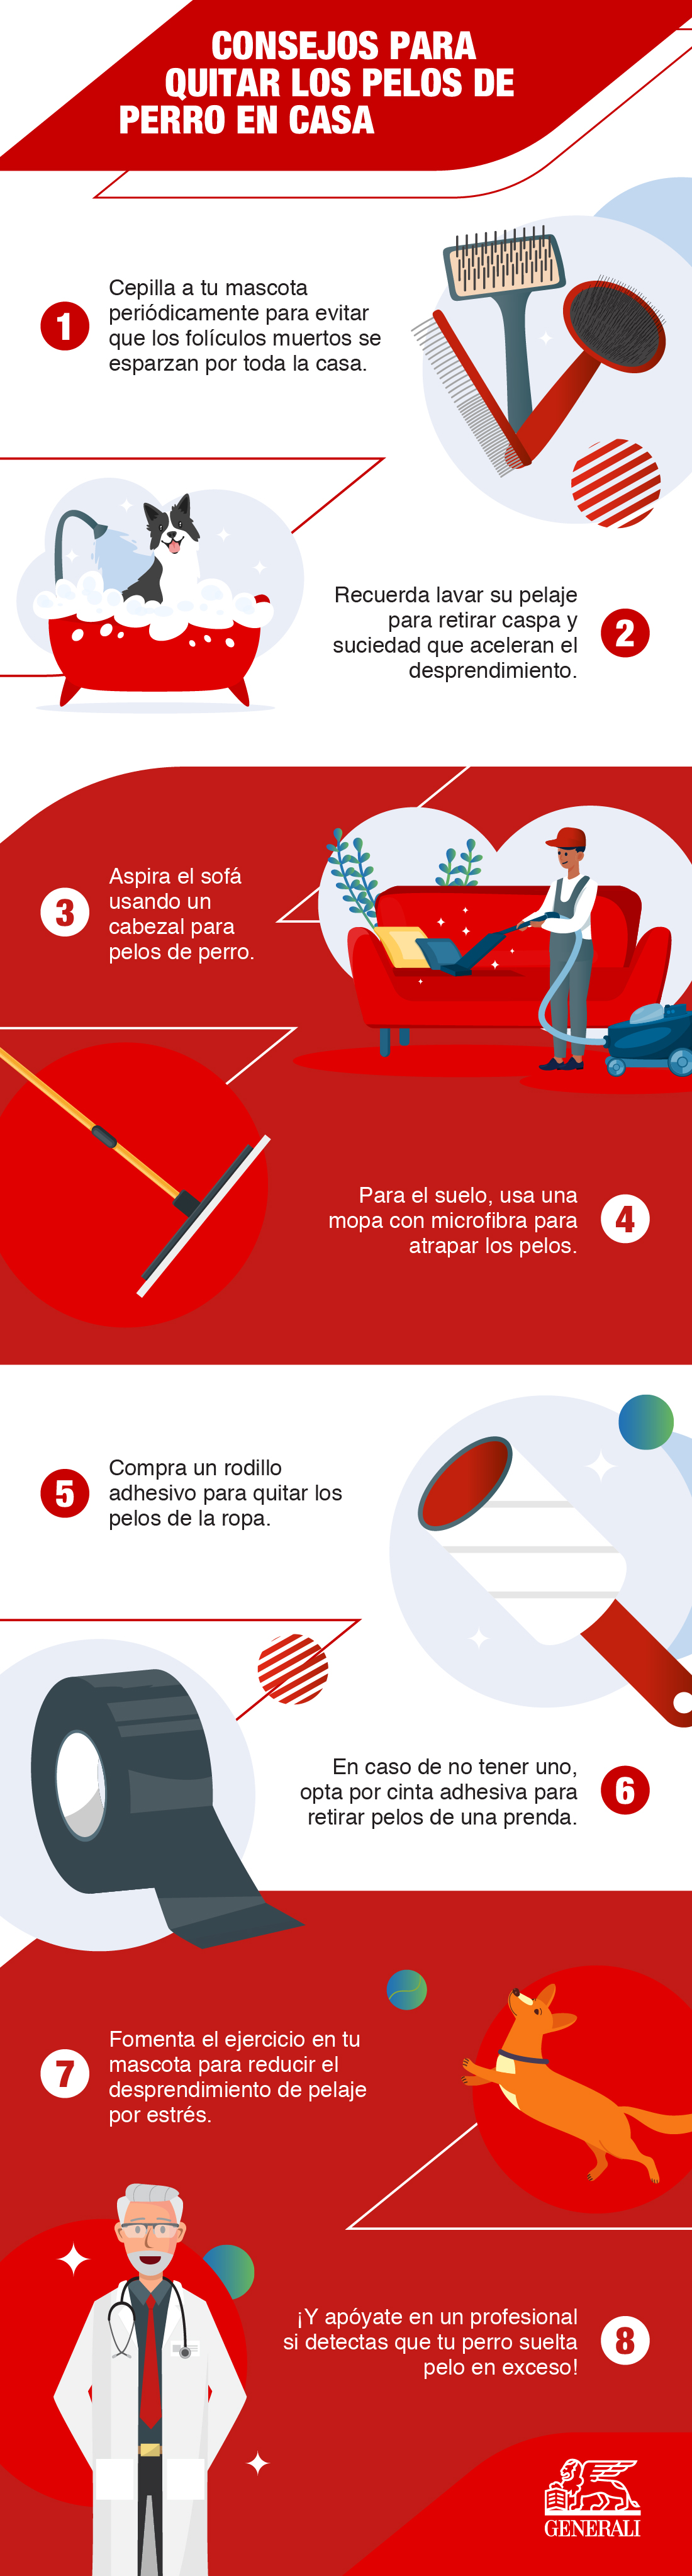 Generali-Spain-Infographic-Wha-Breeds-Of-Dog-Do-Not-Shed-Hair